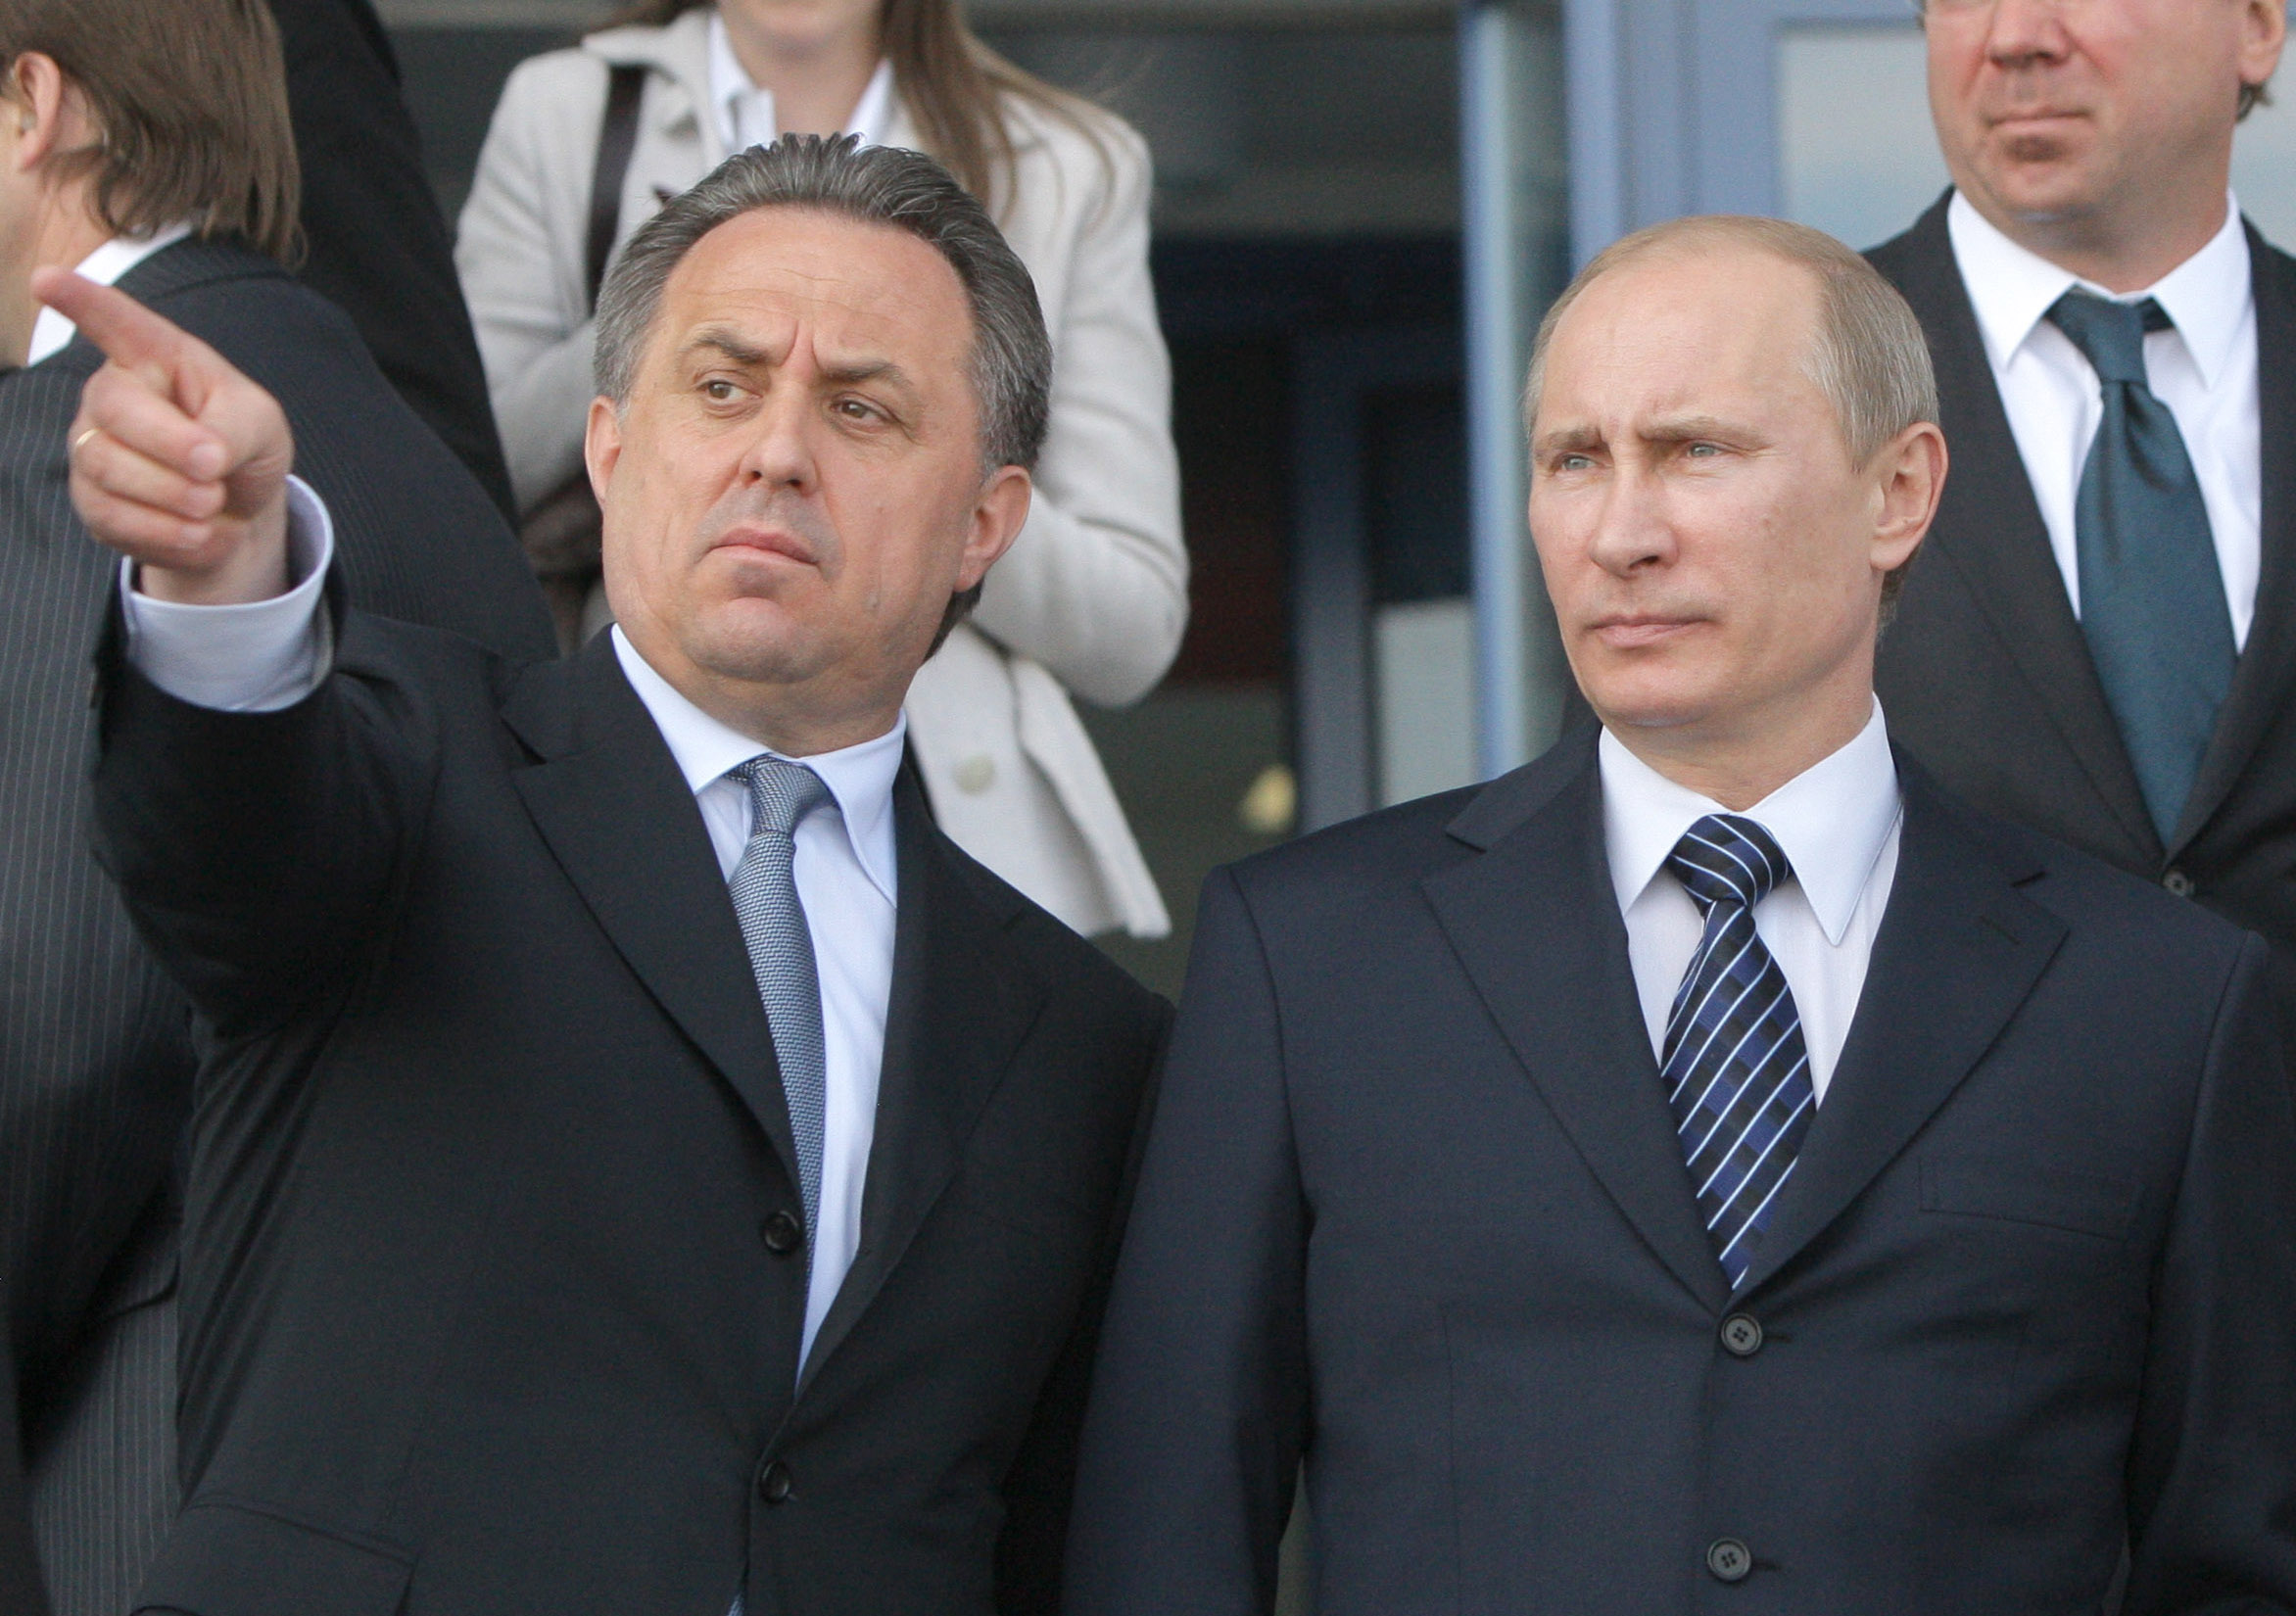 FILE - In this May 16, 2011 file photo then Russian Prime Minister Vladimir Putin, right, is flanked by Sports Minister Vitaly Mutko, left, as they visit a sports complex that is under construction for the 2014 Winter Olympic Games, in Krasnodar, southern Russia. WADA's independent commission said Monday, Nov. 9, 2015 Russia's athletics federation should be suspended and its track and field athletes banned from competition until the country cleans up its act on doping. (AP Photo/RIA Novosti, Alexei Druzhinin, Pool, file)